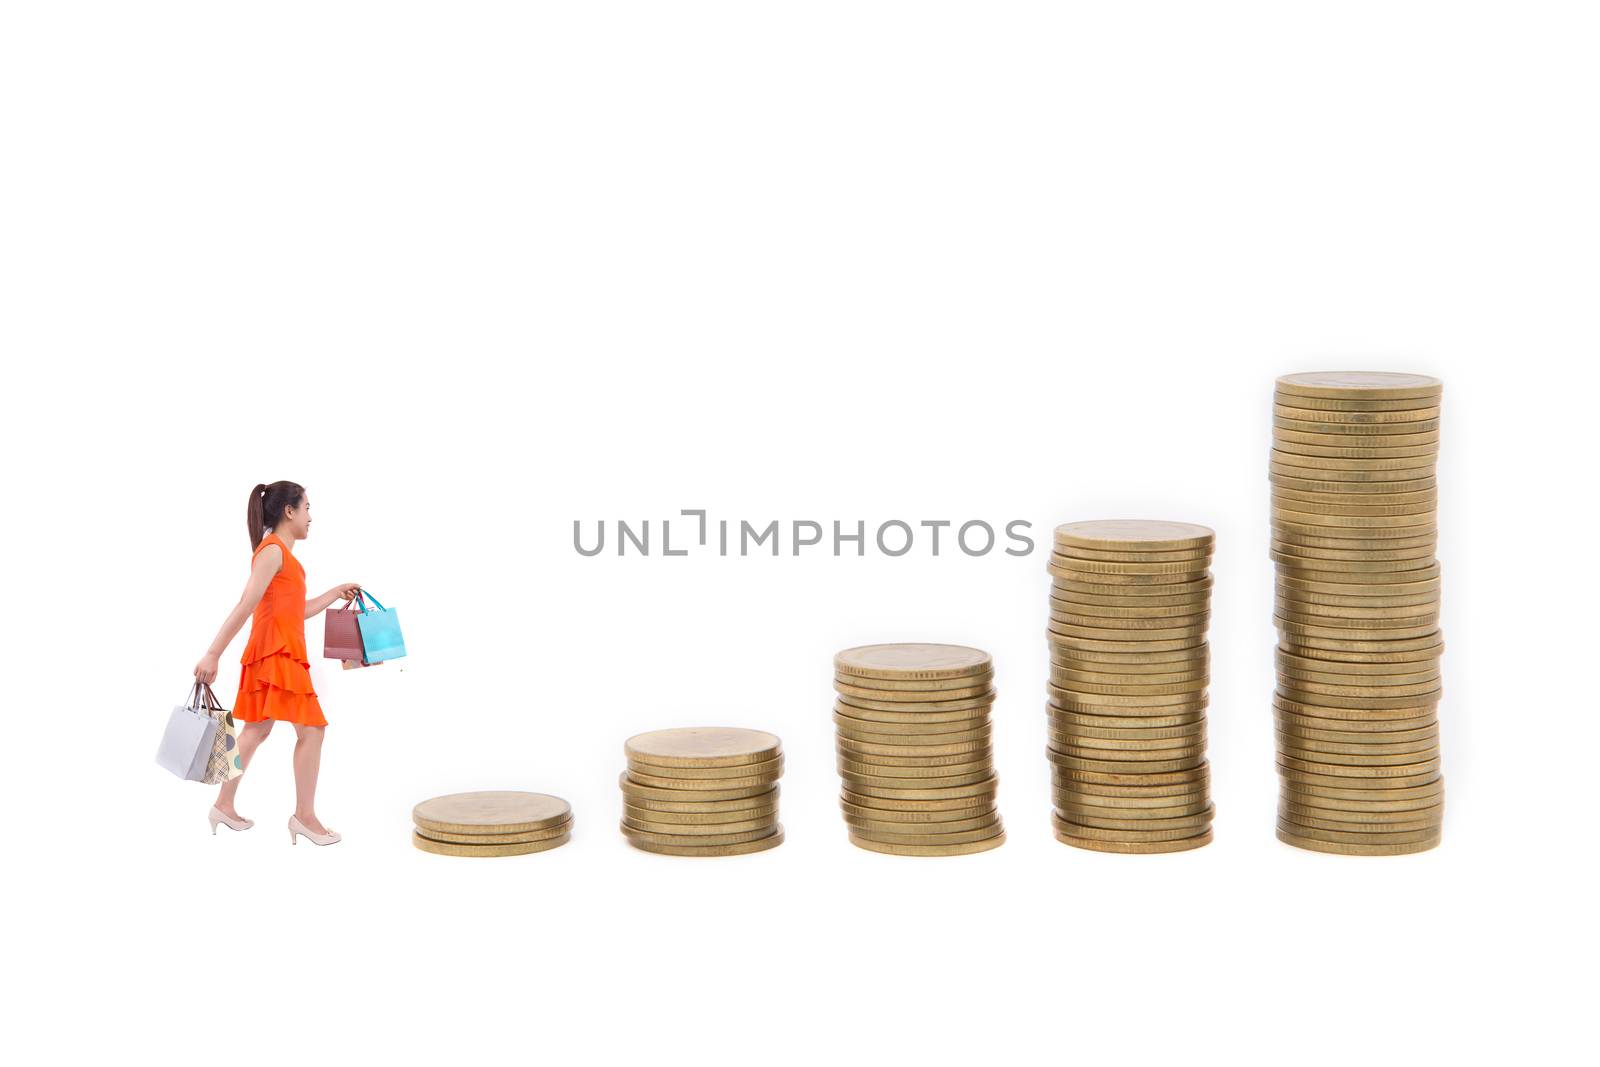 Coins in growth chart, isolated on white background. by rufous